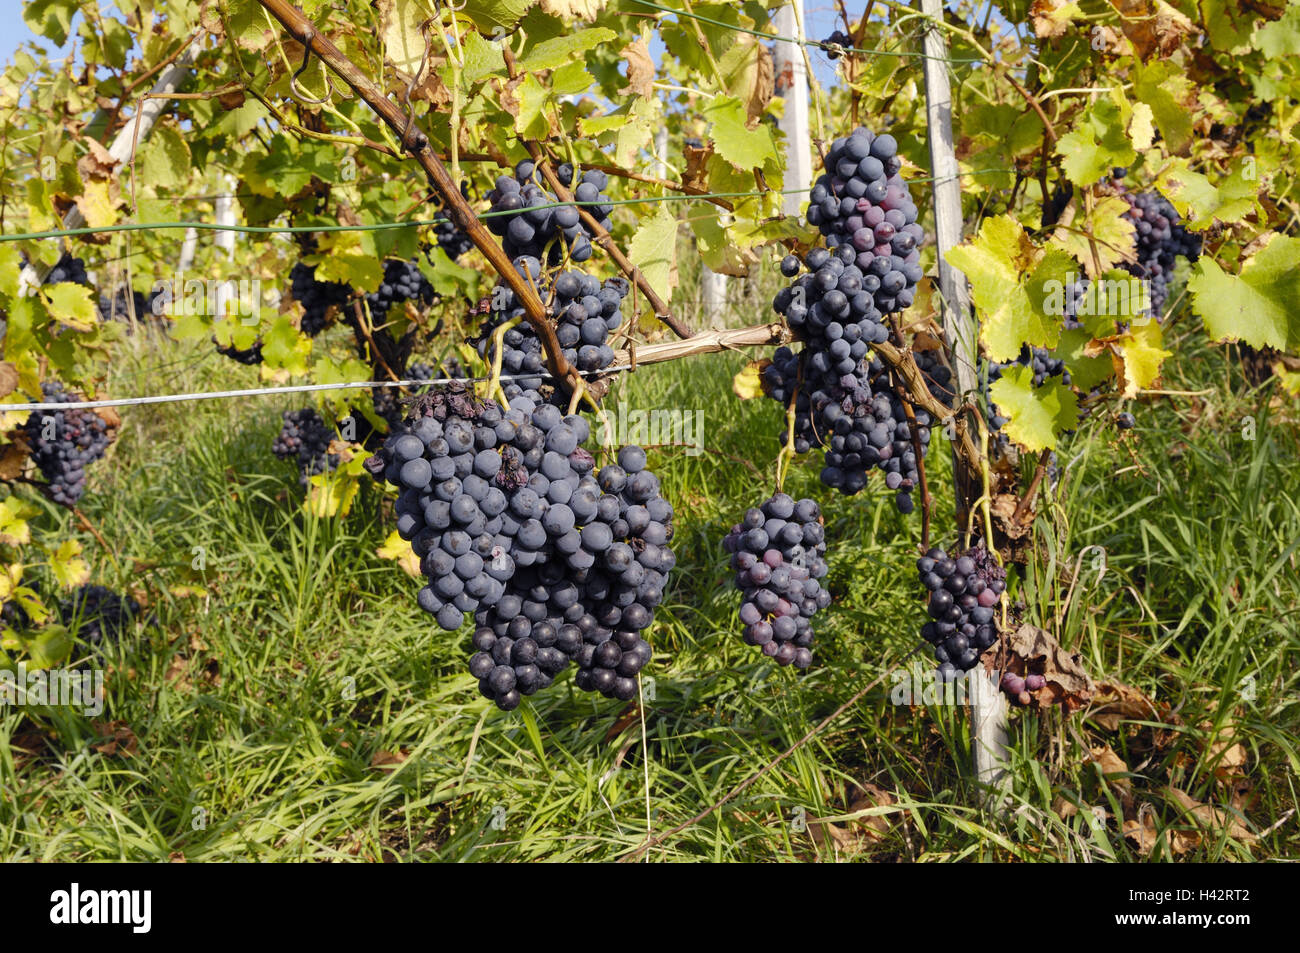 Germany, Baden-Wurttemberg, vineyard, grapes, blue, ripe, nature, viticulture, harvest time, leaves, yellow, autumn, autumn staining, vines, Rebsorte, vines, viticulture, wine-growing, vines, economy, ecological cultivation, ecologically, grapes, Trollinger, posts, props, wires, wooden posts, neglectedly, grass, grow rampant, natural, ecological wine, biowine, ecological vineyard, medium close-up, Stock Photo